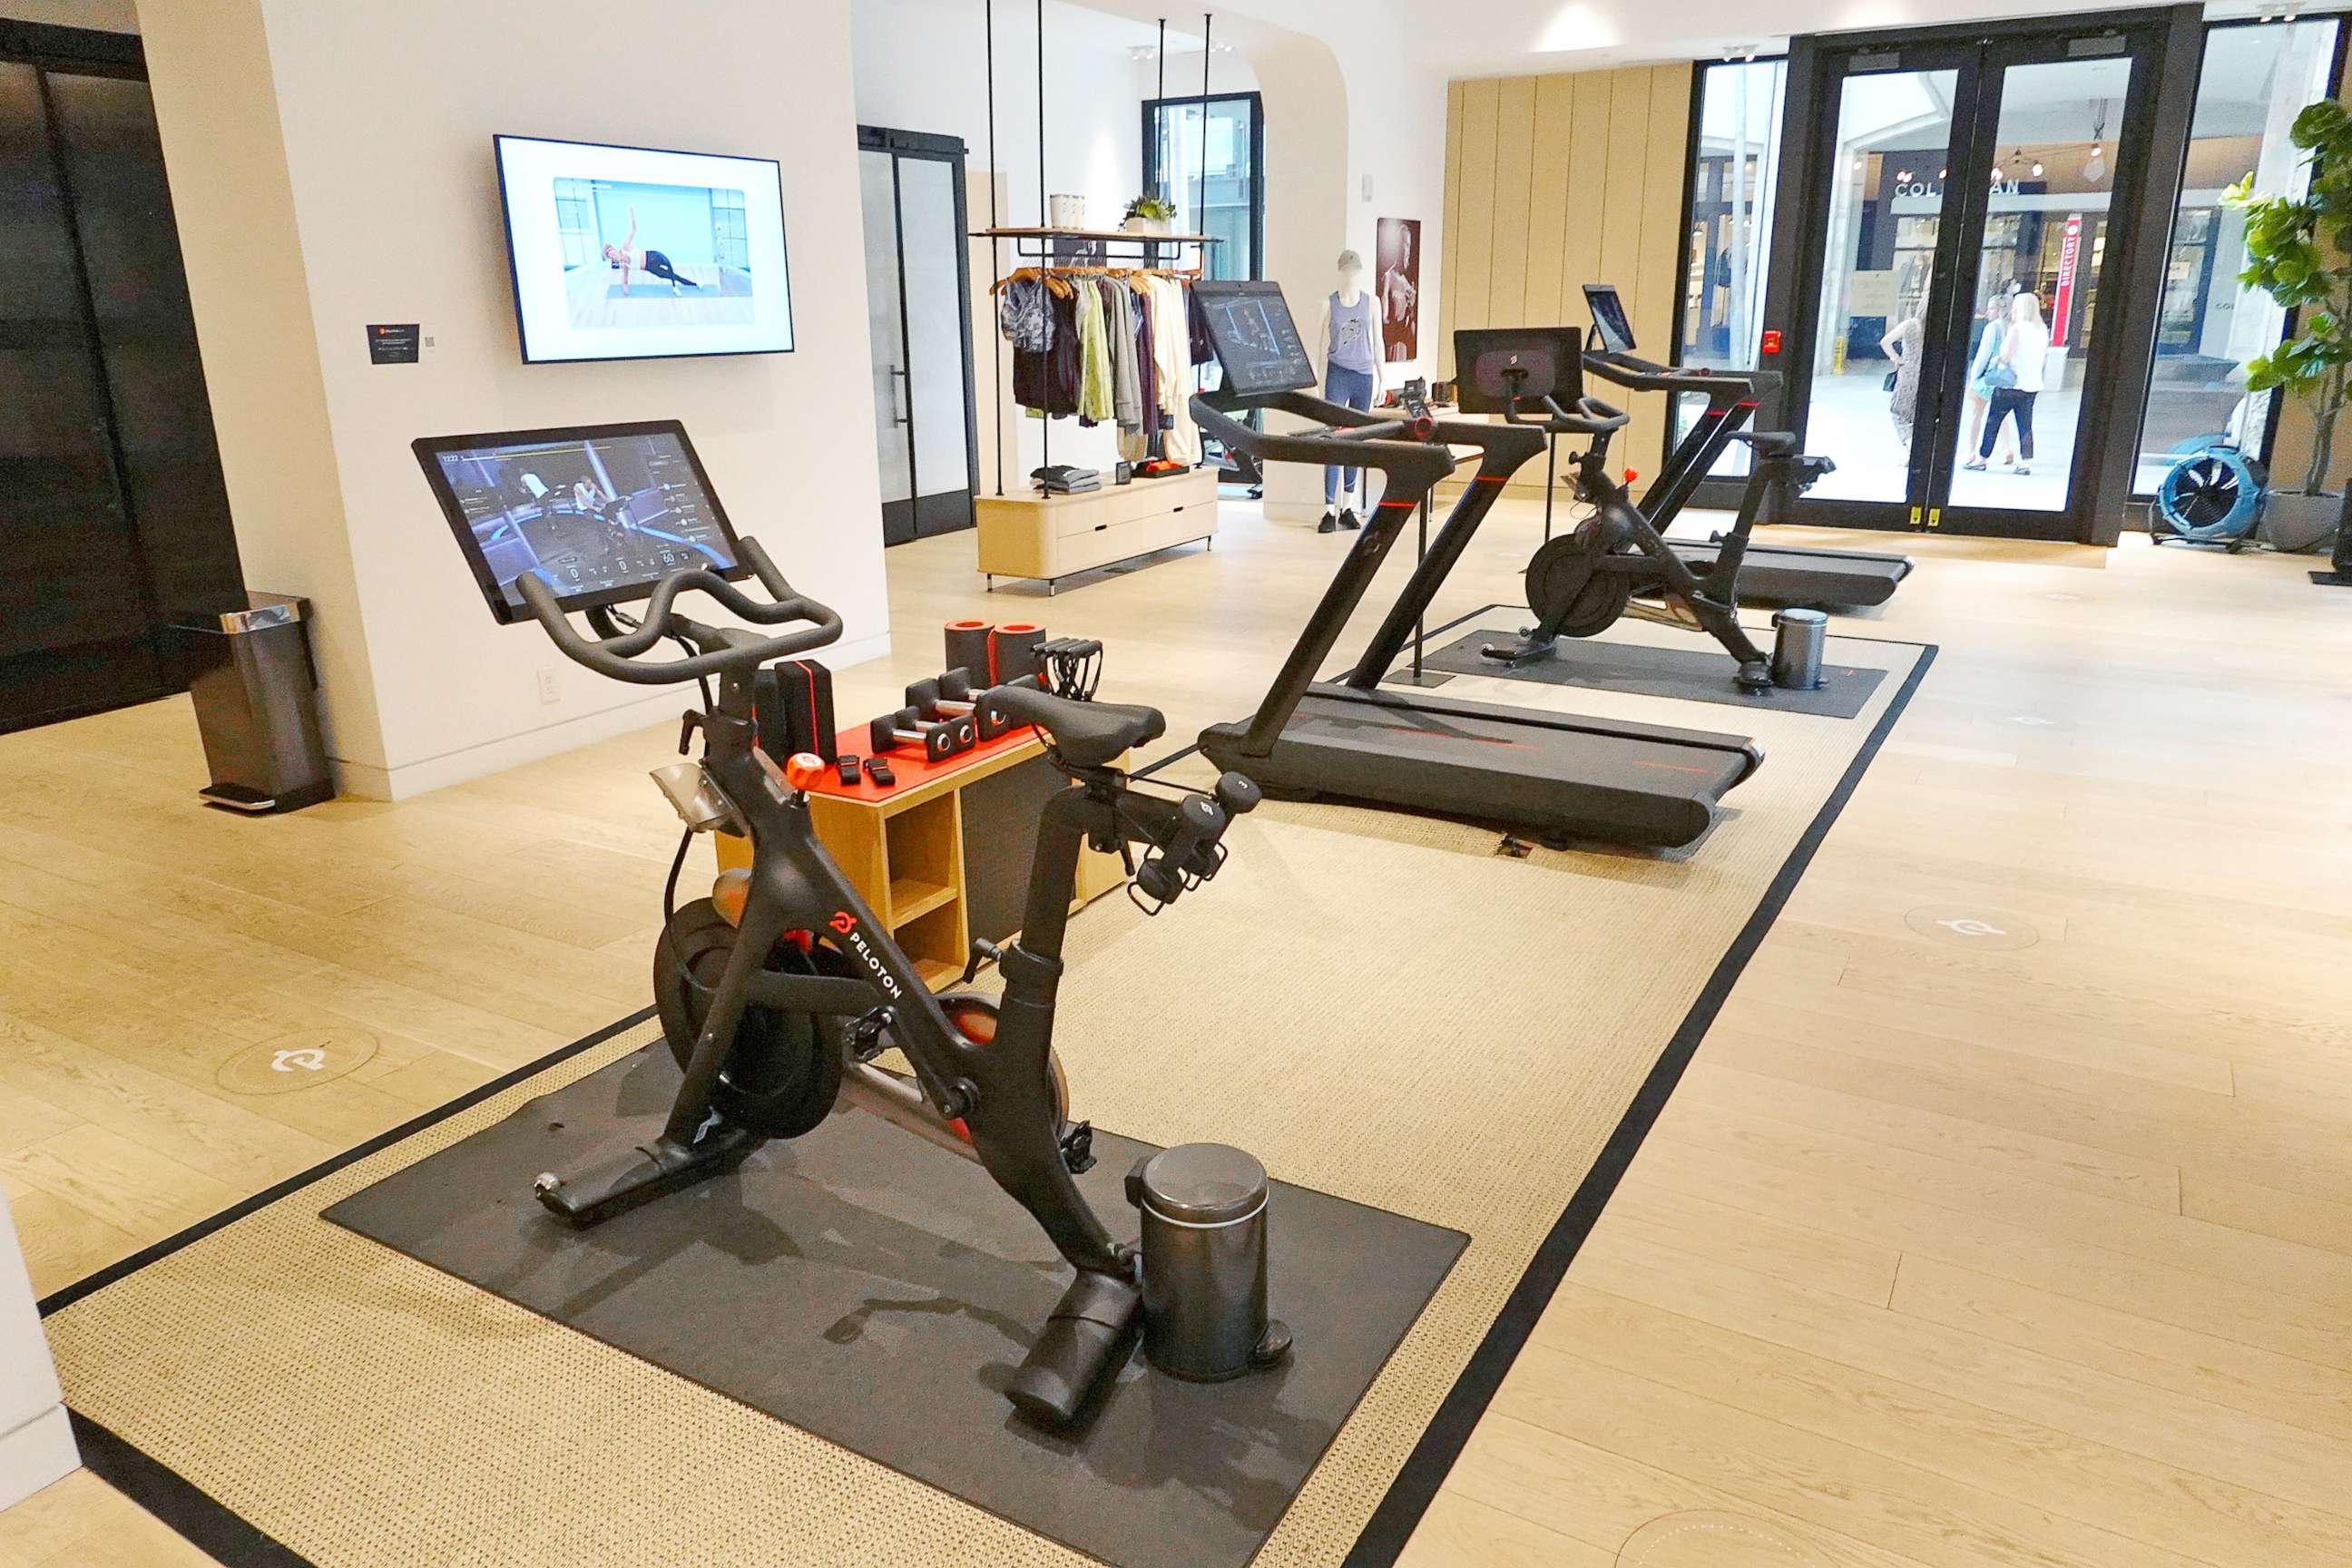 PHOTO: A Peloton show room displays bikes and treadmills on Jan. 20, 2022 in Coral Gables, Fla.